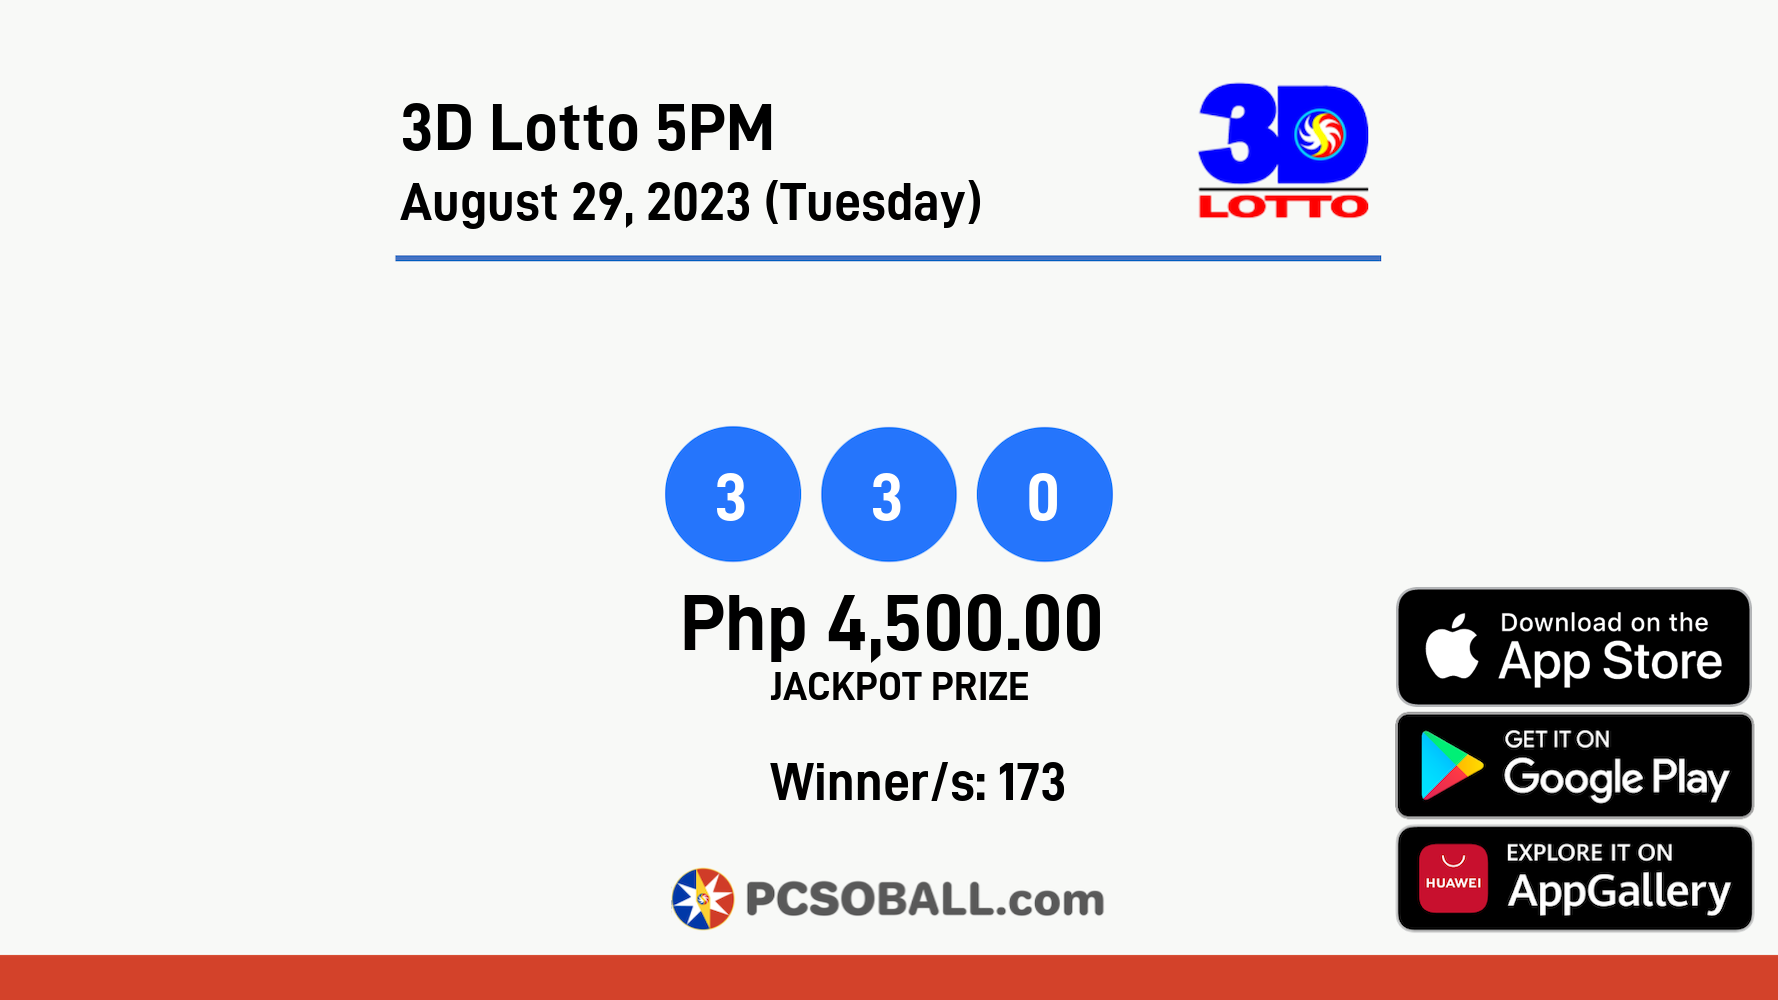 3D Lotto 5PM August 29, 2023 (Tuesday) Result